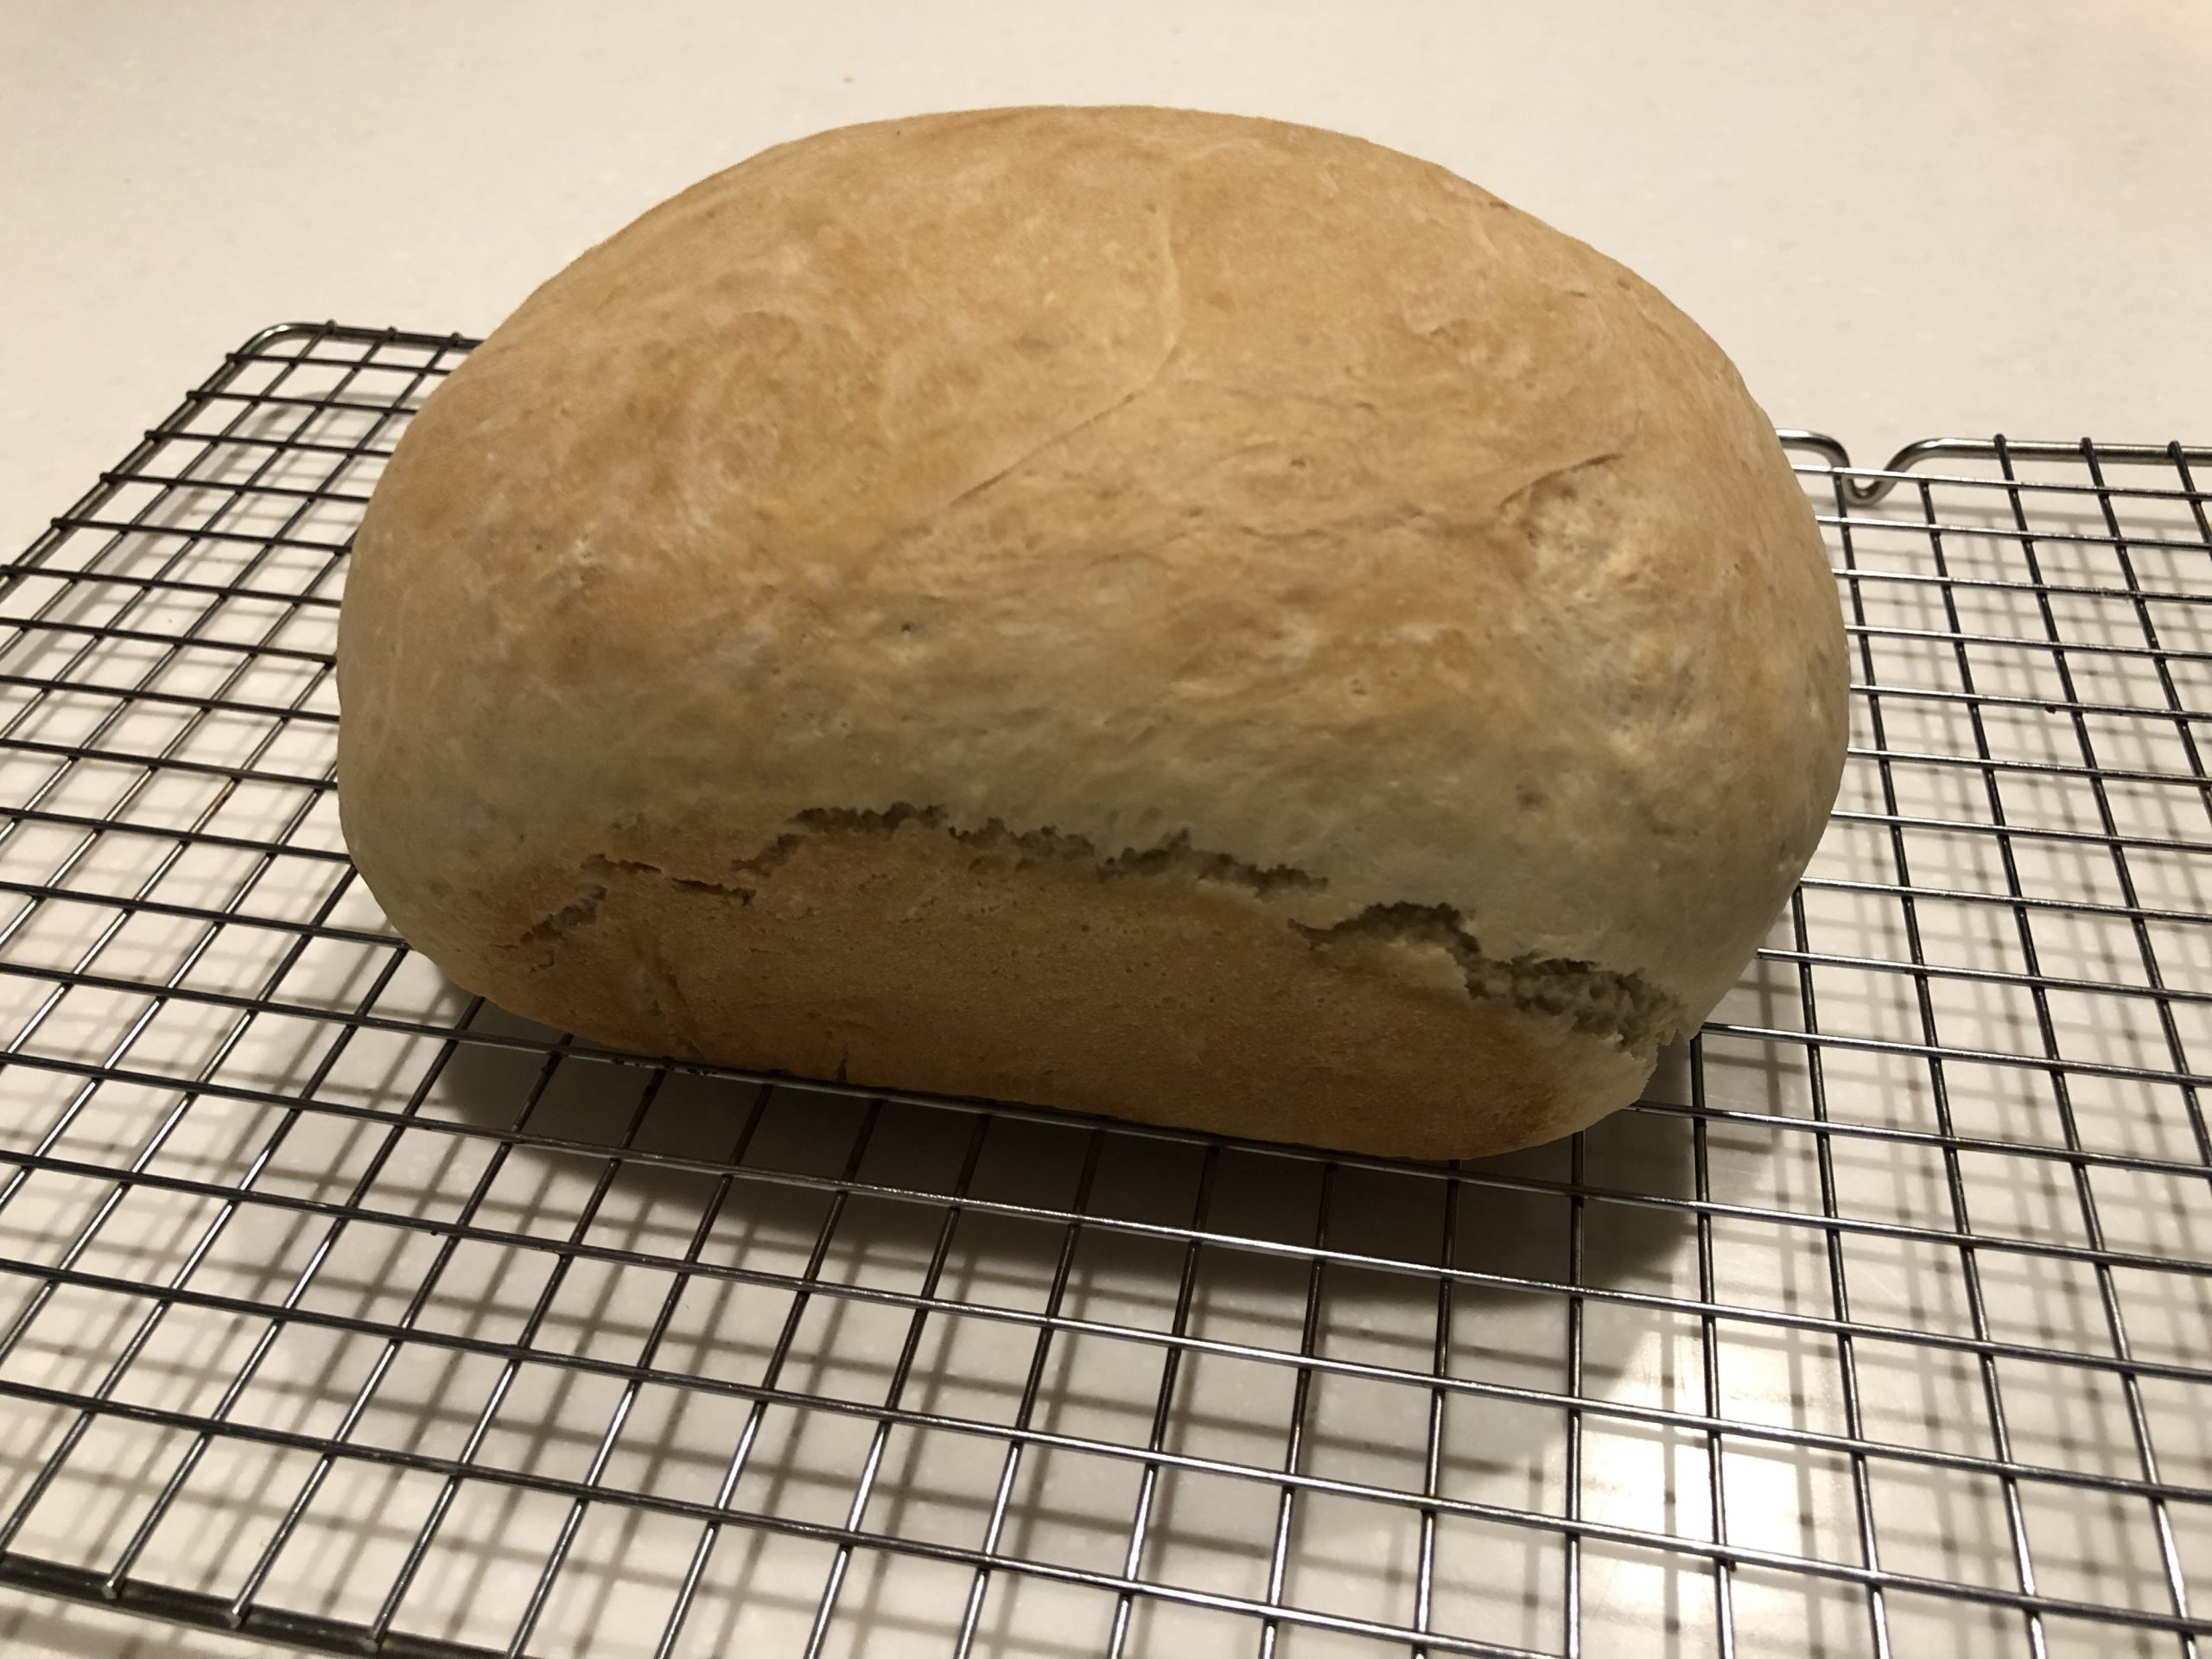 First, made from scratch, loaf of bread